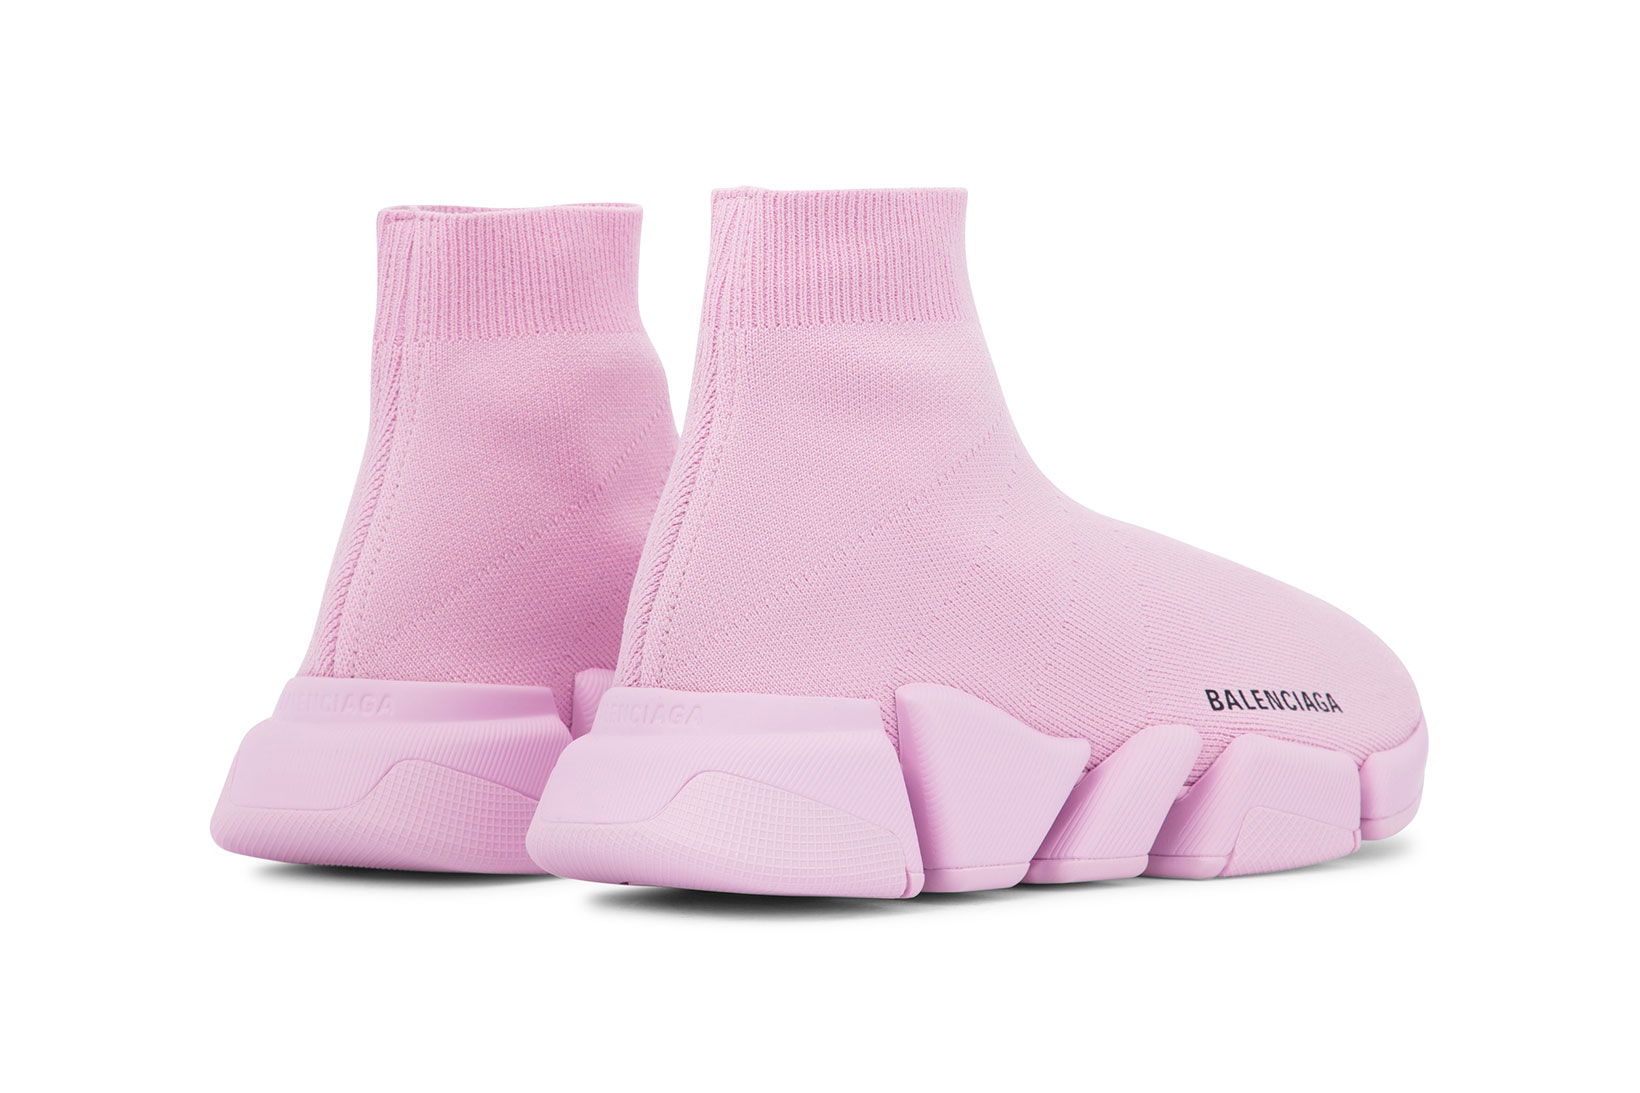 balenciaga speed 2 0 sneakers light pink colorway price where to buy 2